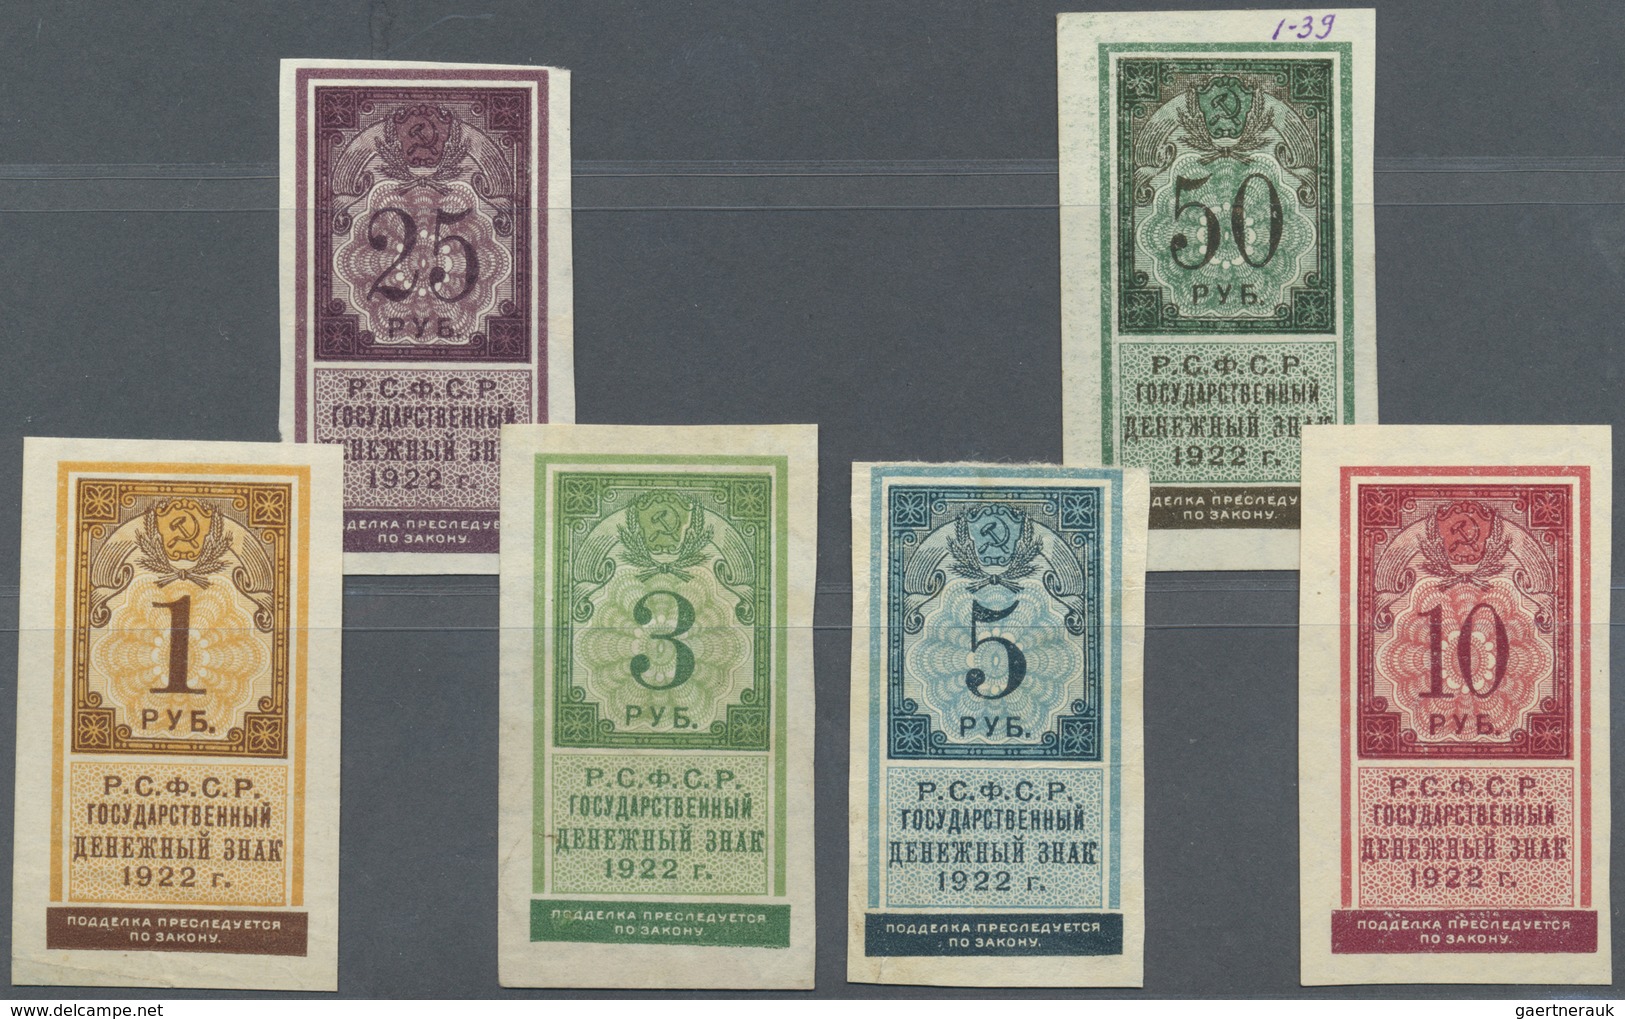 Russia / Russland: Full Set Of The State Currency Notes 1922 Containing 1, 3, 5, 10, 25 And 50 Ruble - Russia